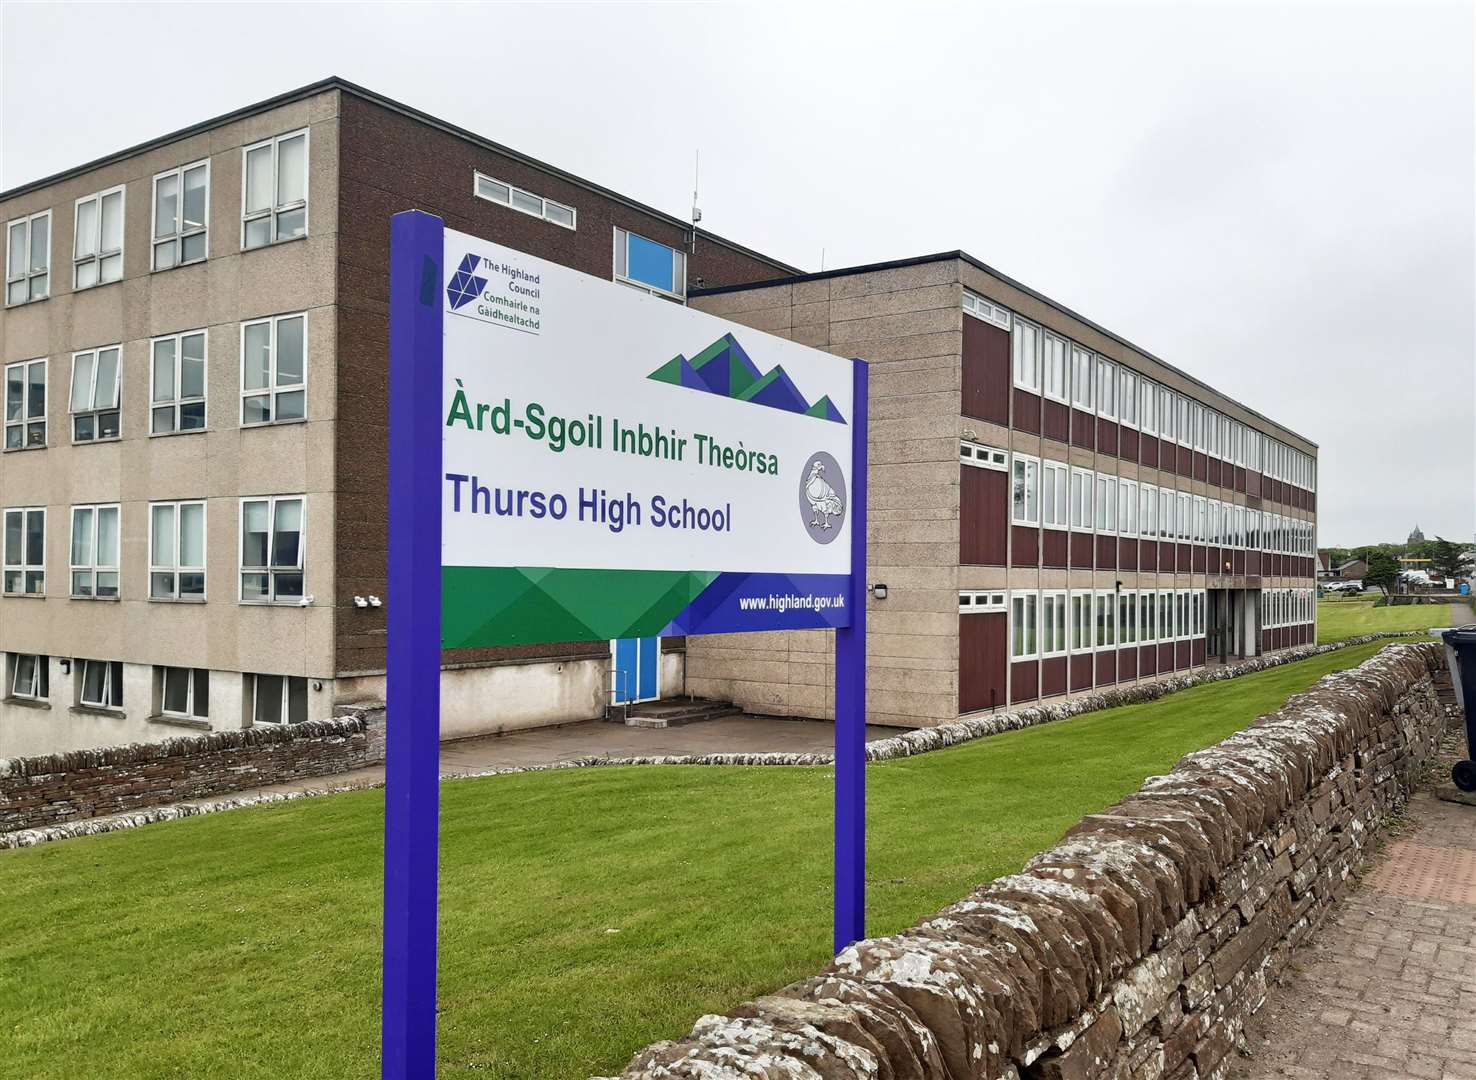 Thurso High School, where one block was condemned due to faulty concrete.